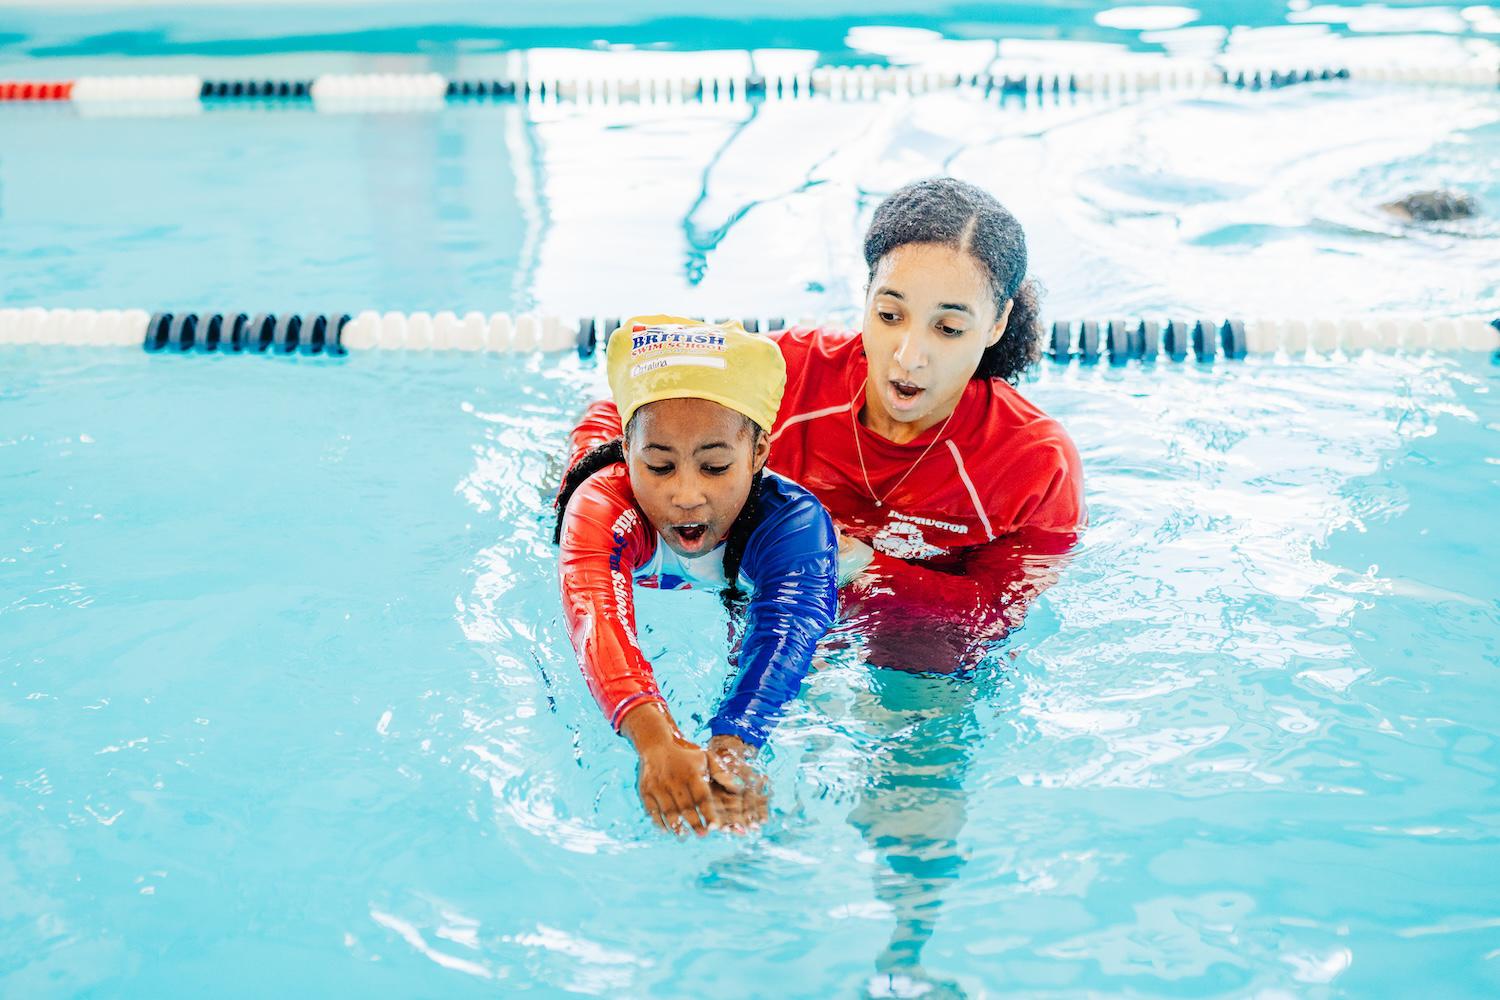 British Swim School at LA Fitness Barrie - Cundles Rd. E. Barrie (705)408-2345